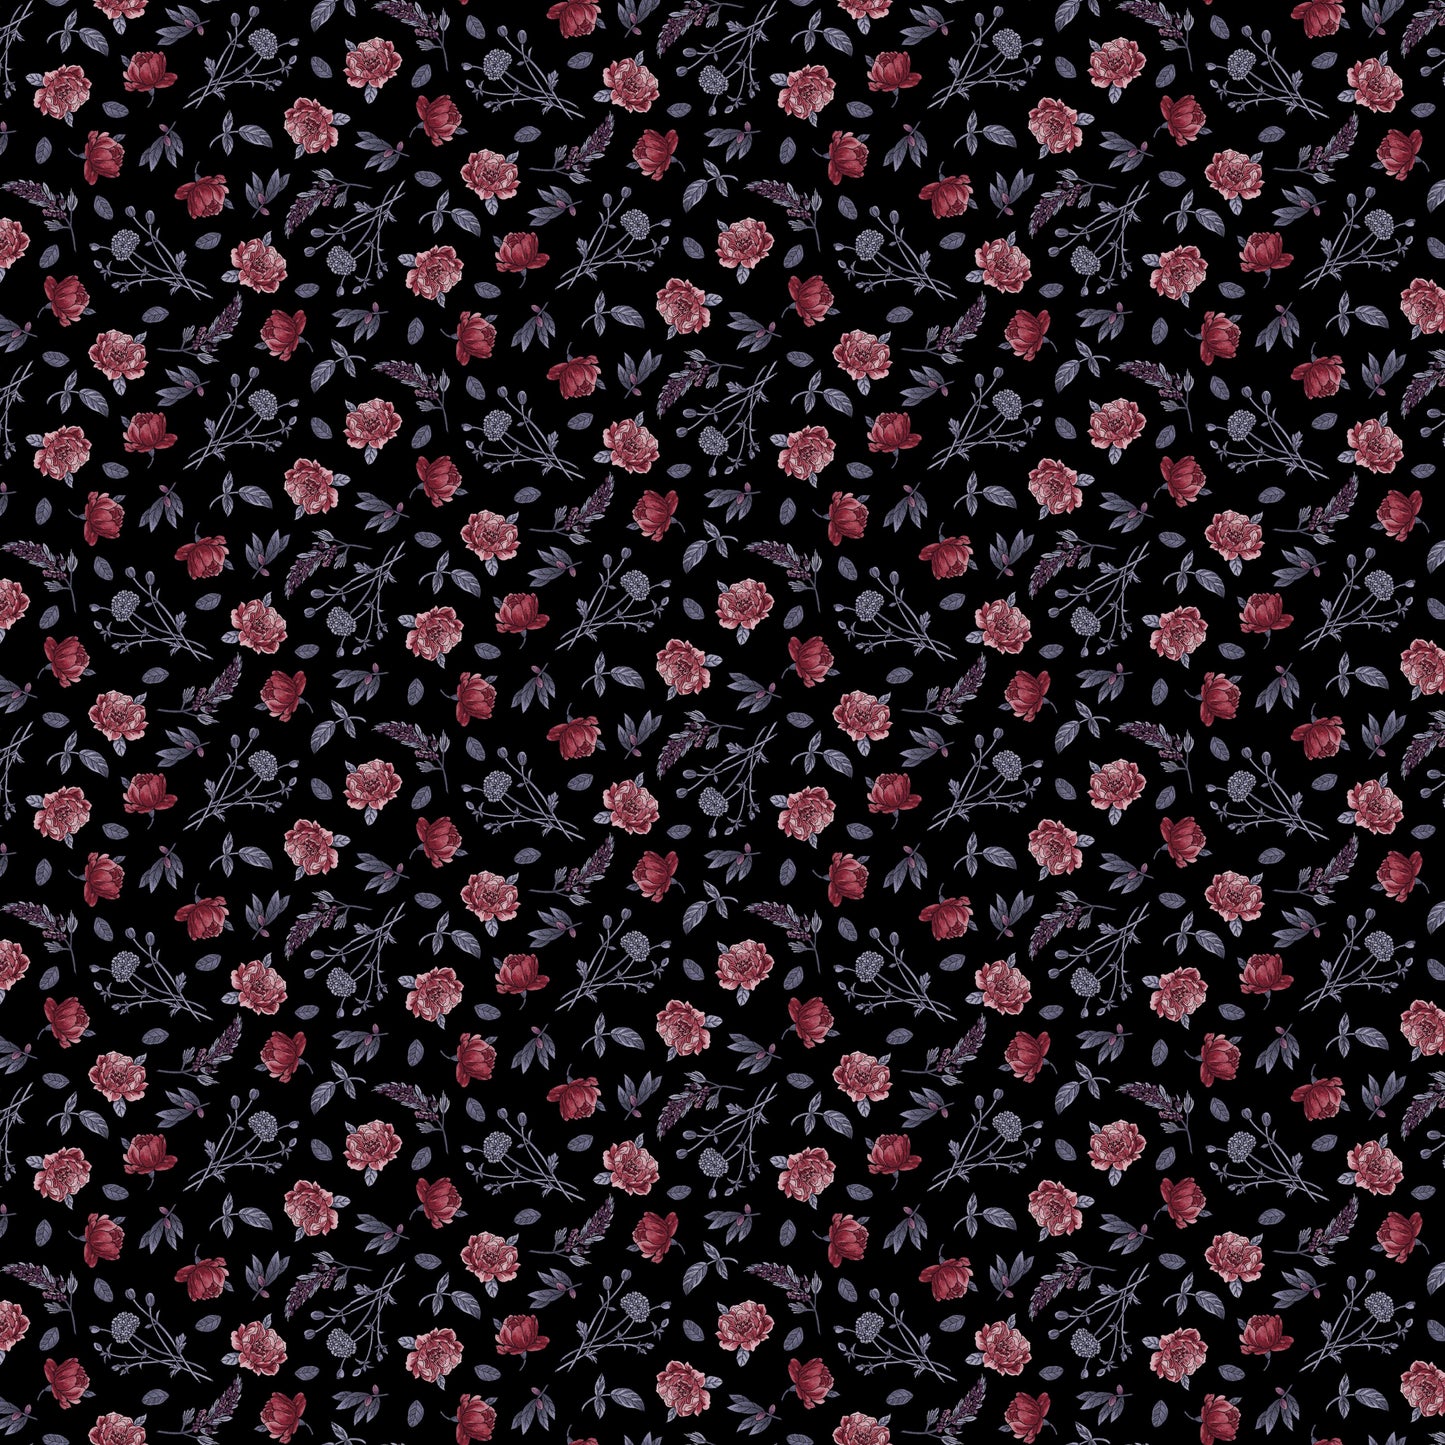 Bones Collection by Melissa Wang Flowers Black    7119-99 Cotton Woven Fabric